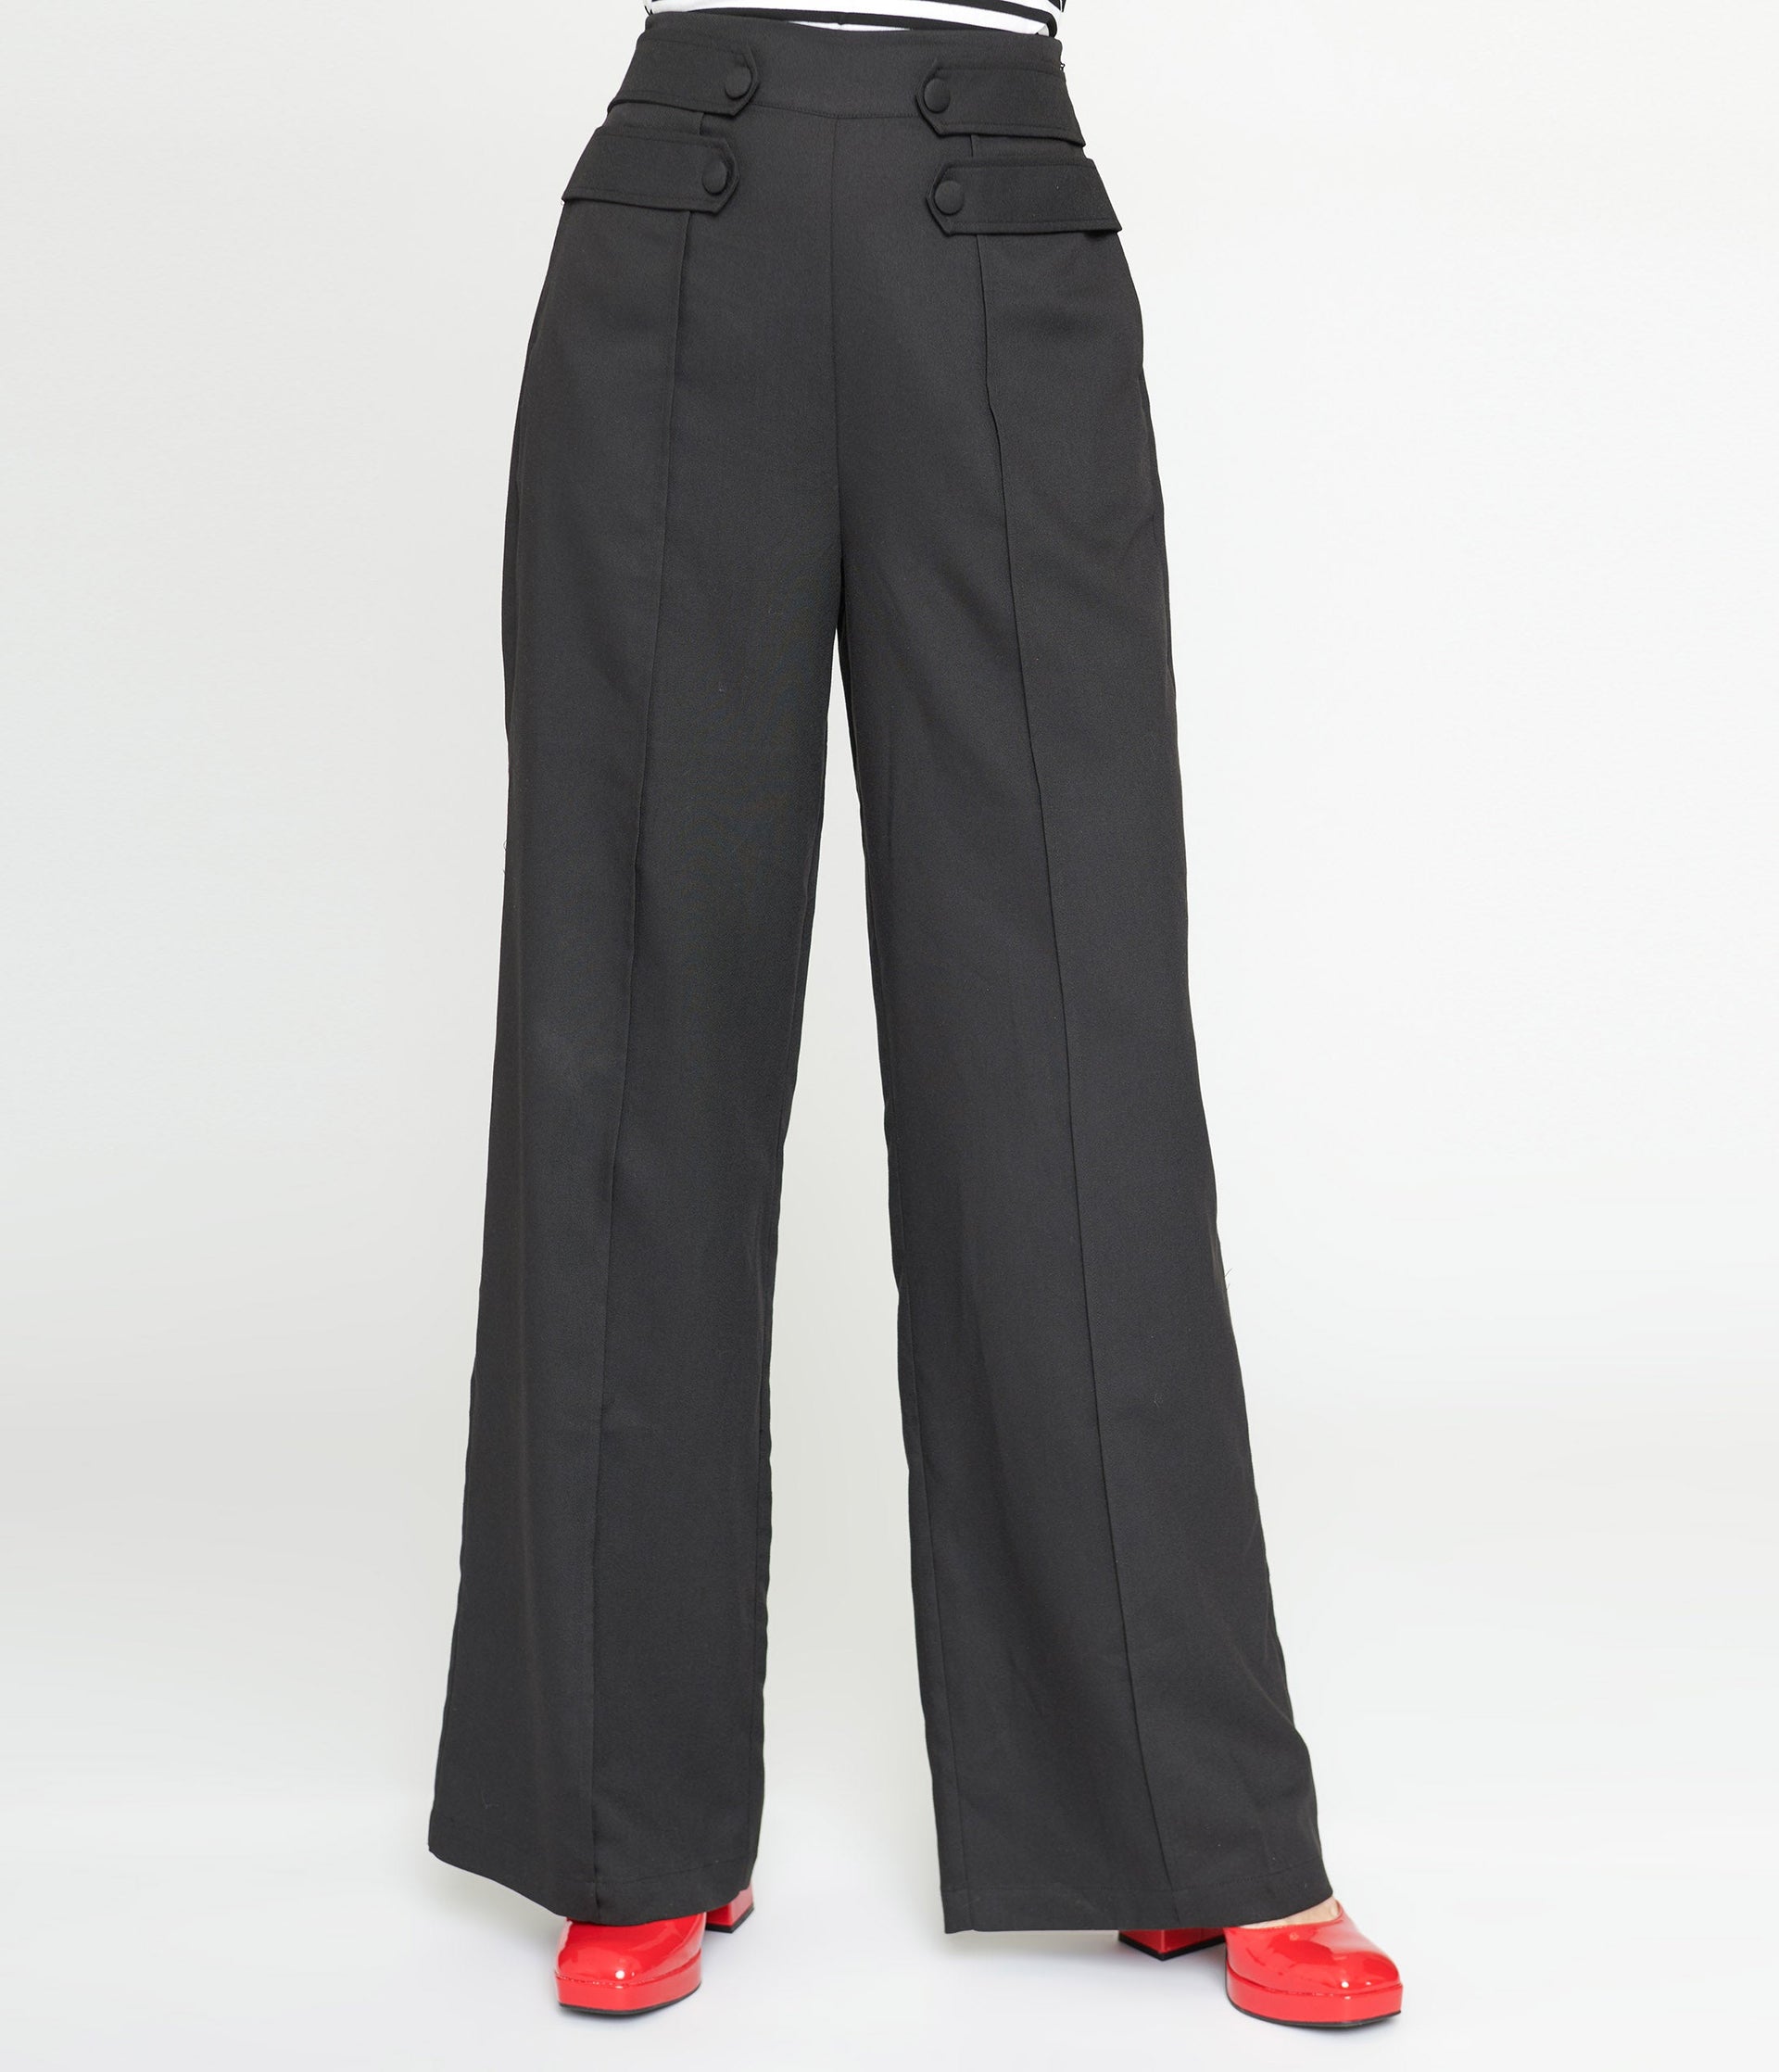 Black High Waisted Wide Leg Trousers - 1930s & 40s style